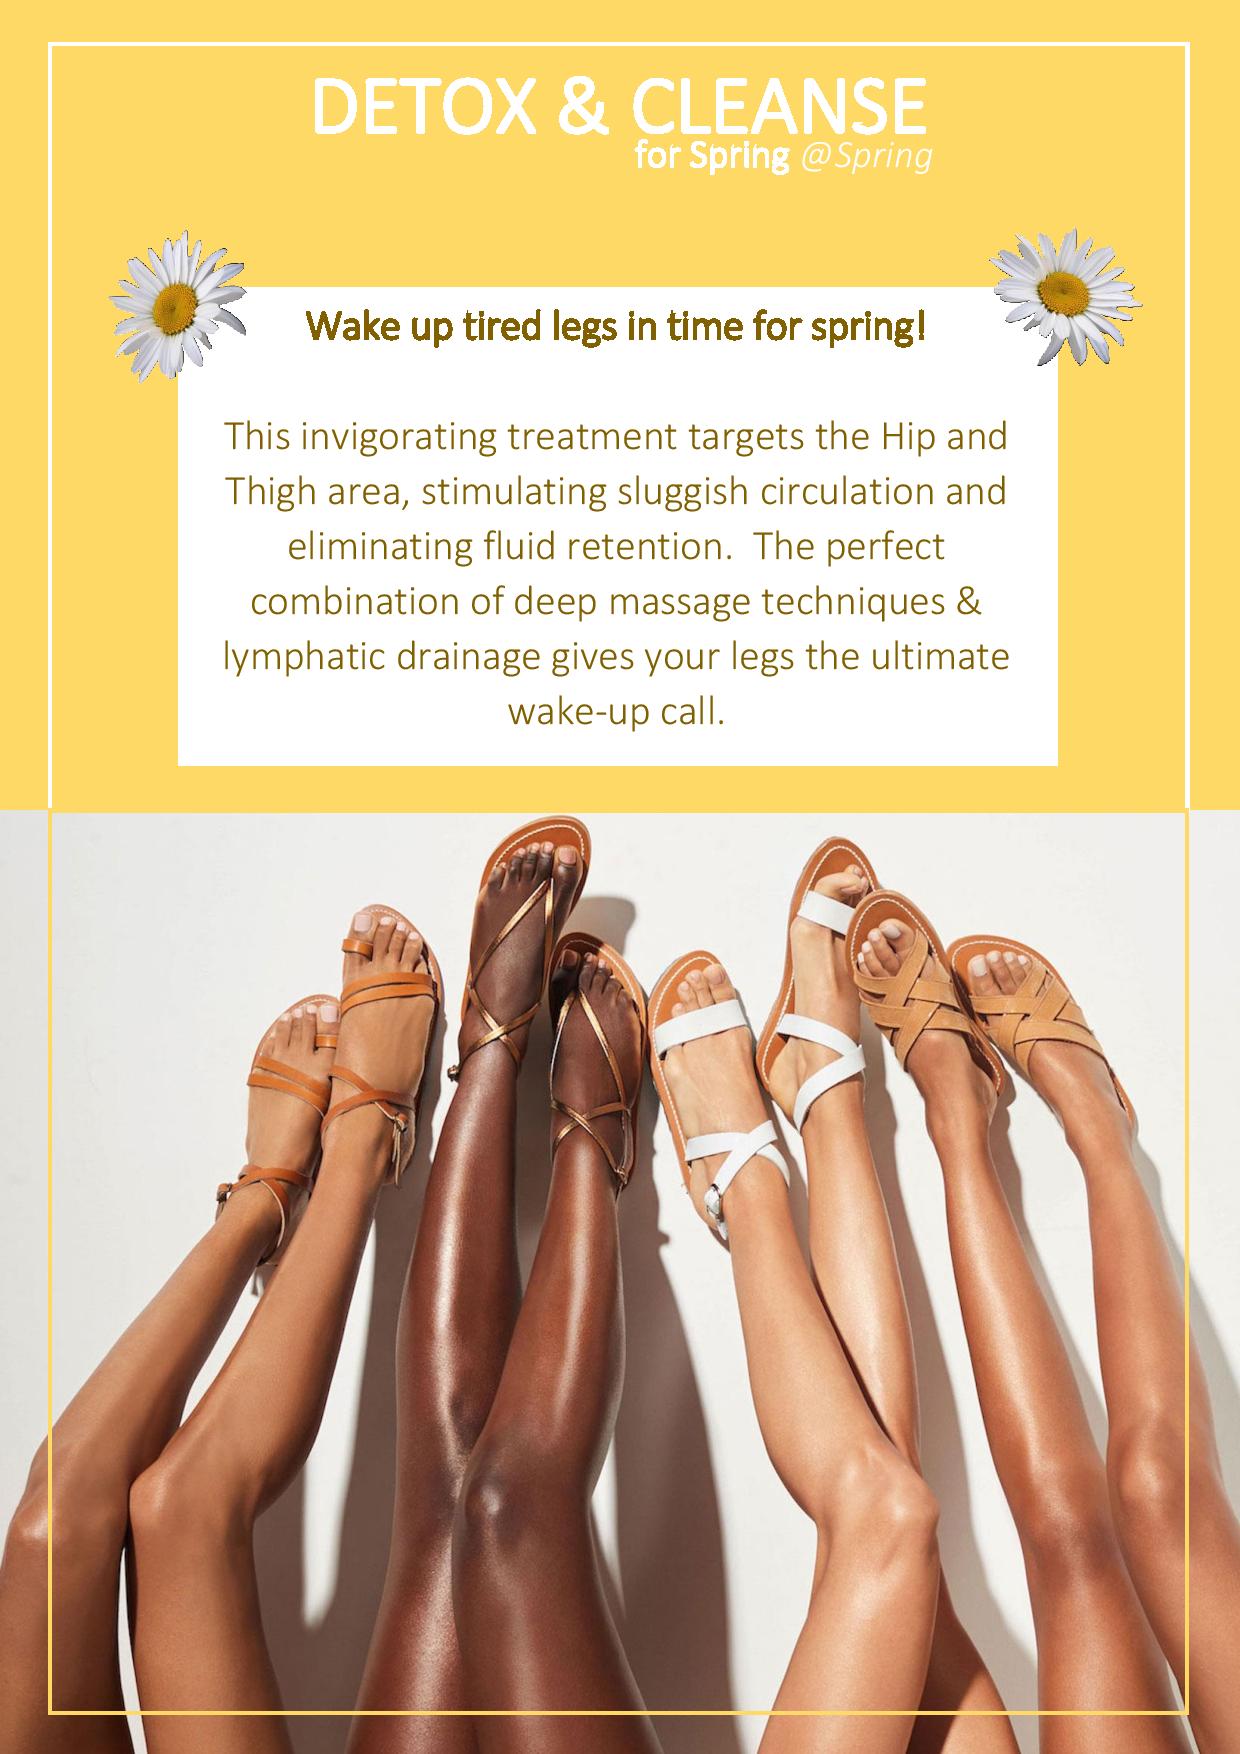 Wake up tired legs in time for Spring!